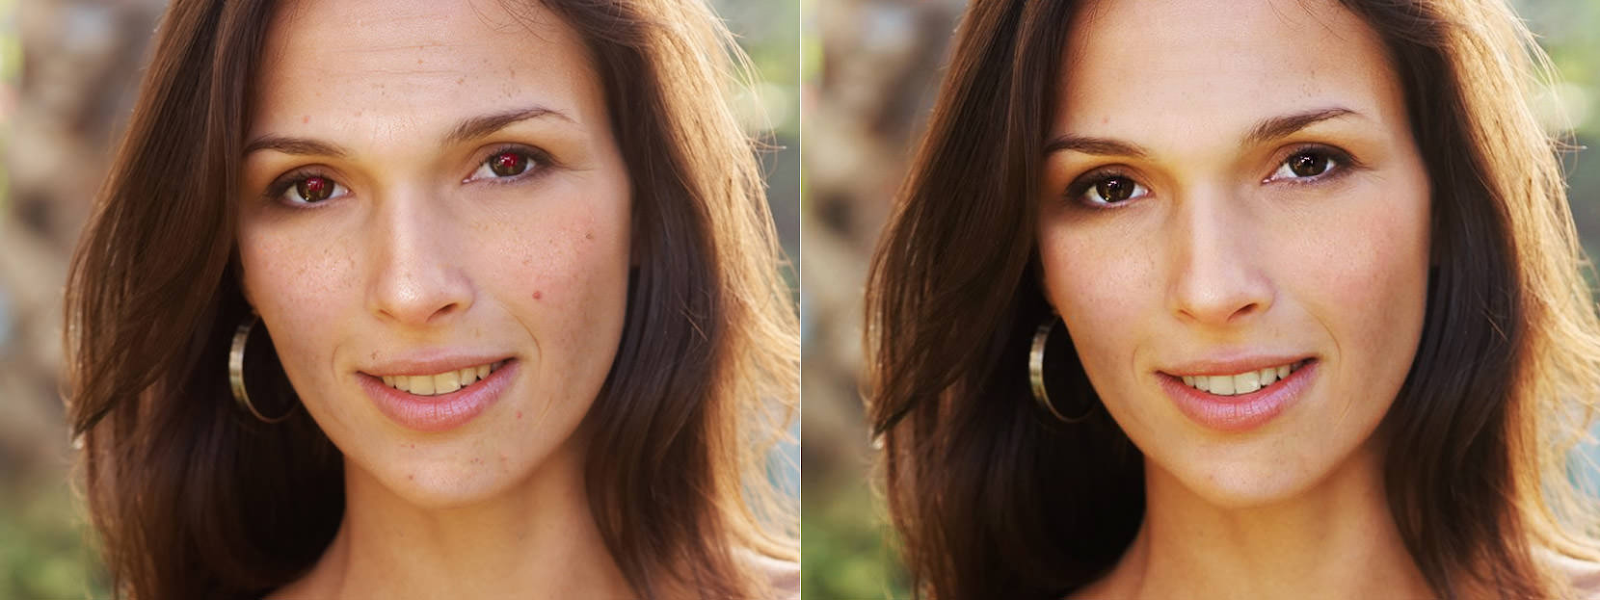 10-Minute Ultra-Fast Retouching Turnaround: Scaling Efficiency in Image Editing image 3